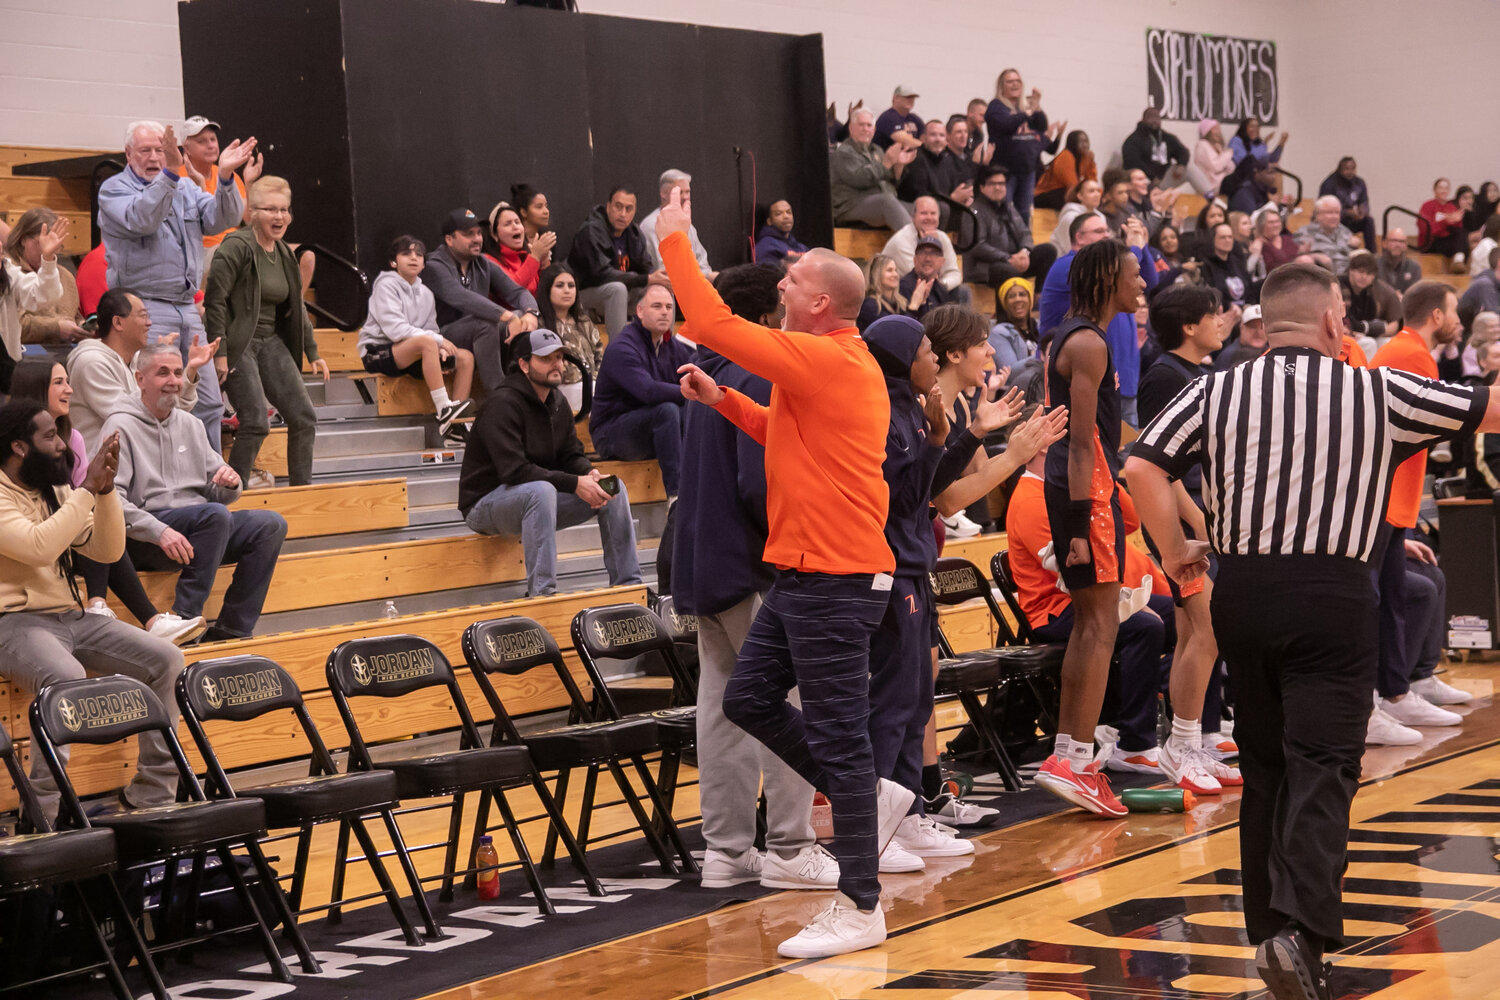 Seven Lakes head coach Shannon Heston cheers towards the crowd during Saturday's game between Seven lakes and Jordan at the Jordan gym.